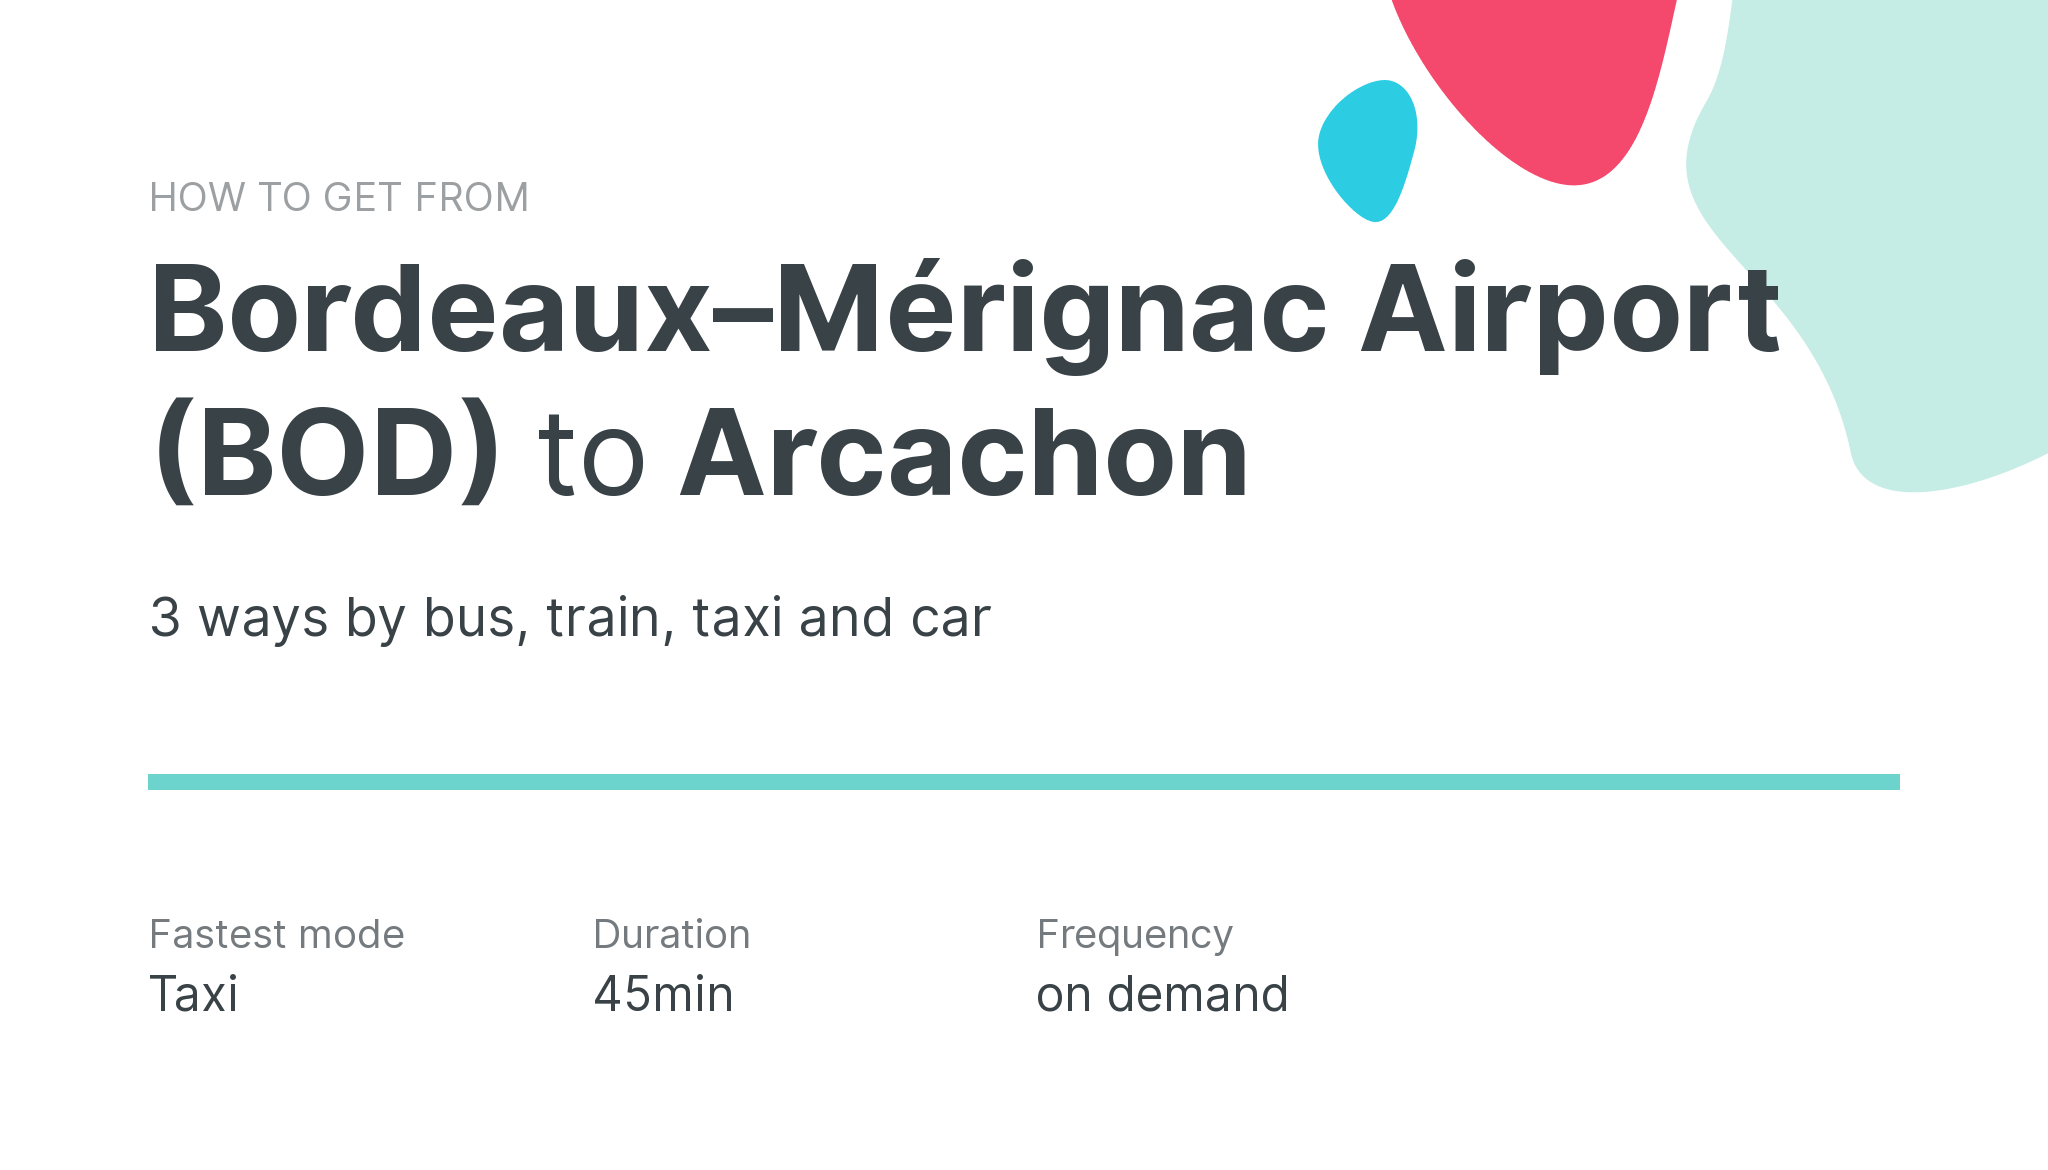 How do I get from Bordeaux–Mérignac Airport (BOD) to Arcachon